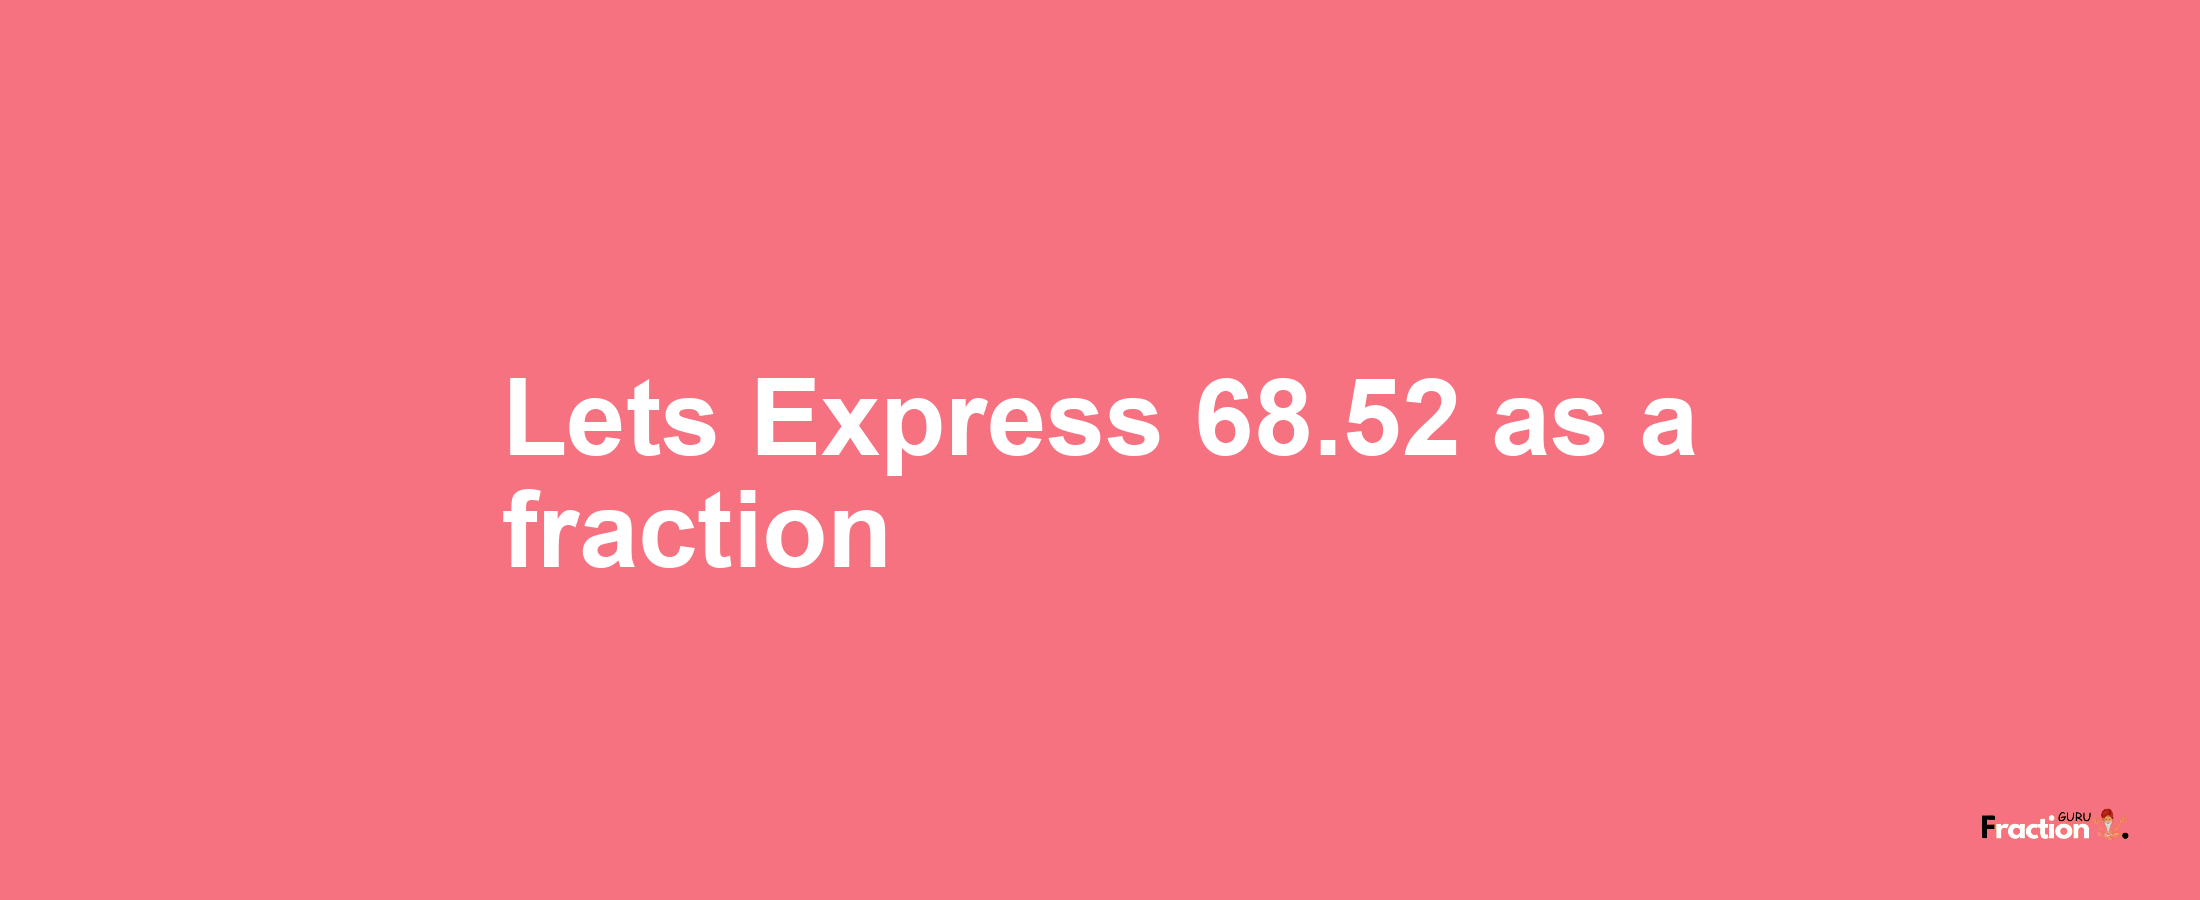 Lets Express 68.52 as afraction